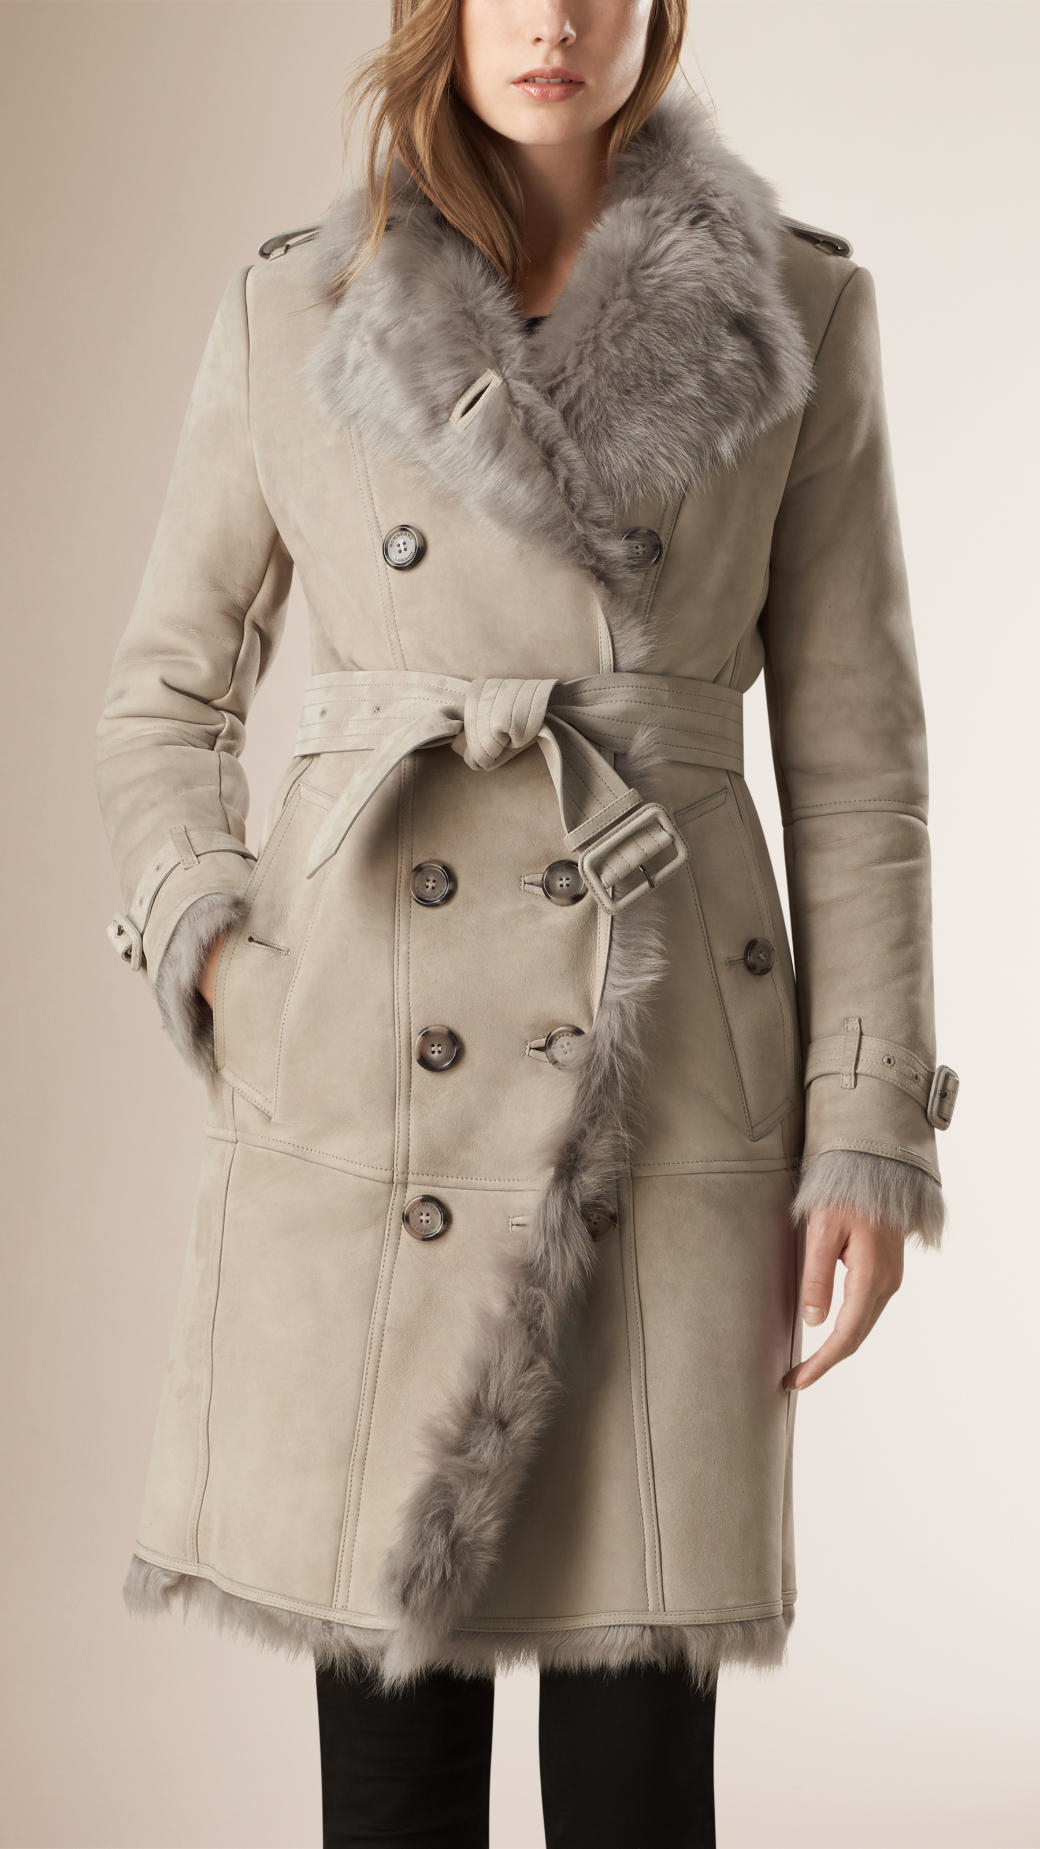 Total 31+ imagen burberry shearling trench coat - Abzlocal.mx